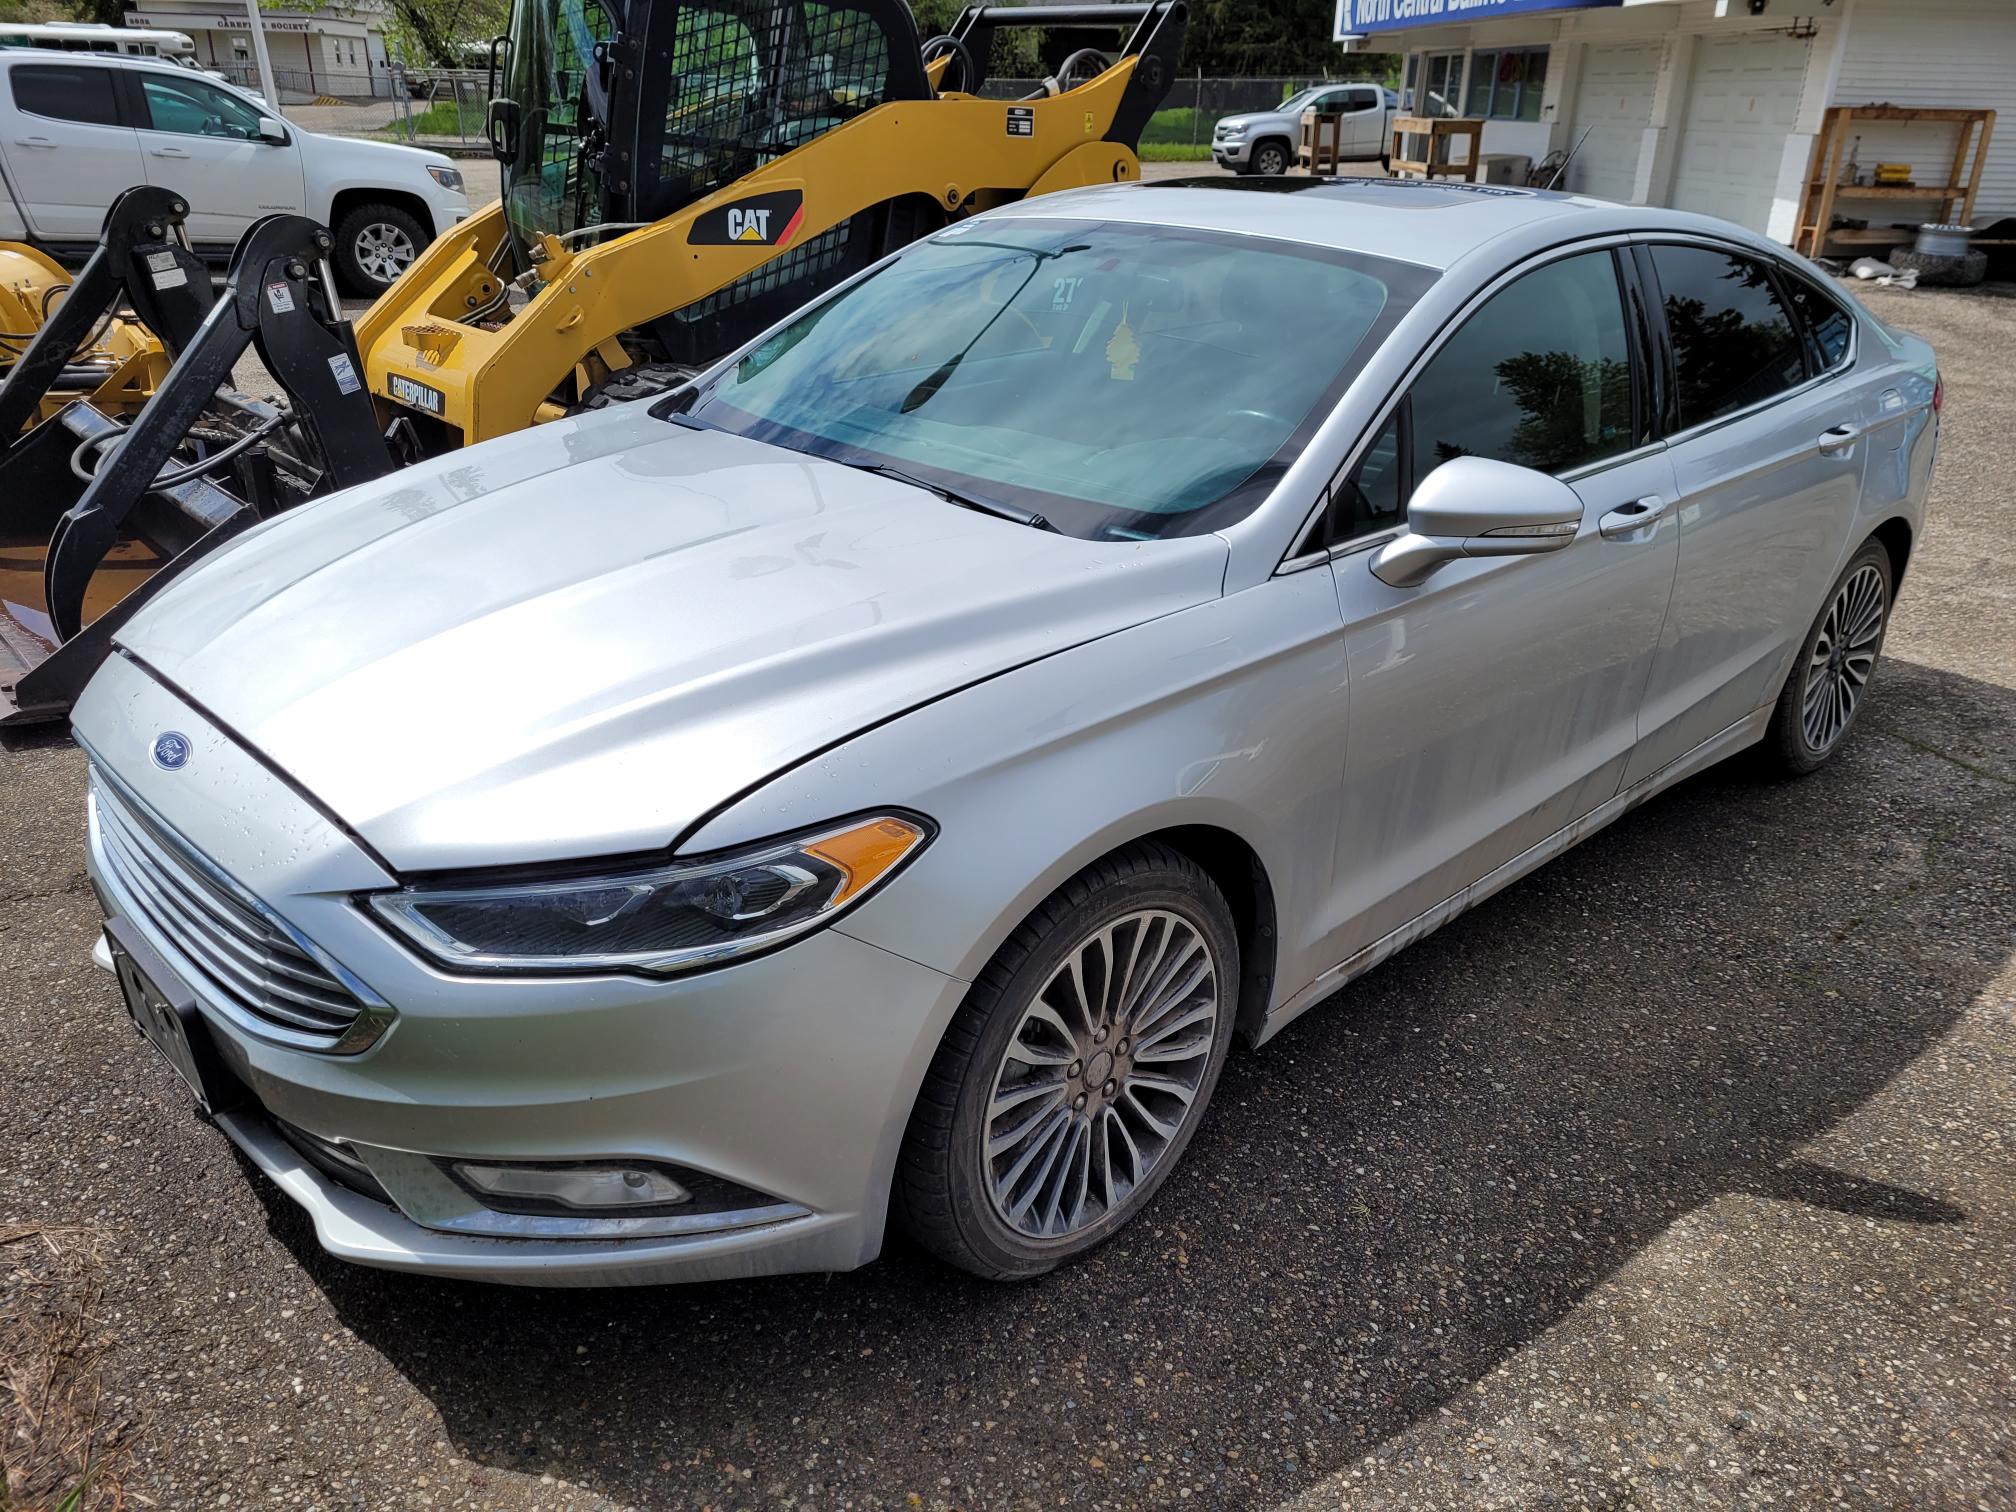 2017 Ford Fusion SE AWD #B-PG-0605 Re-listed Located in Prince George